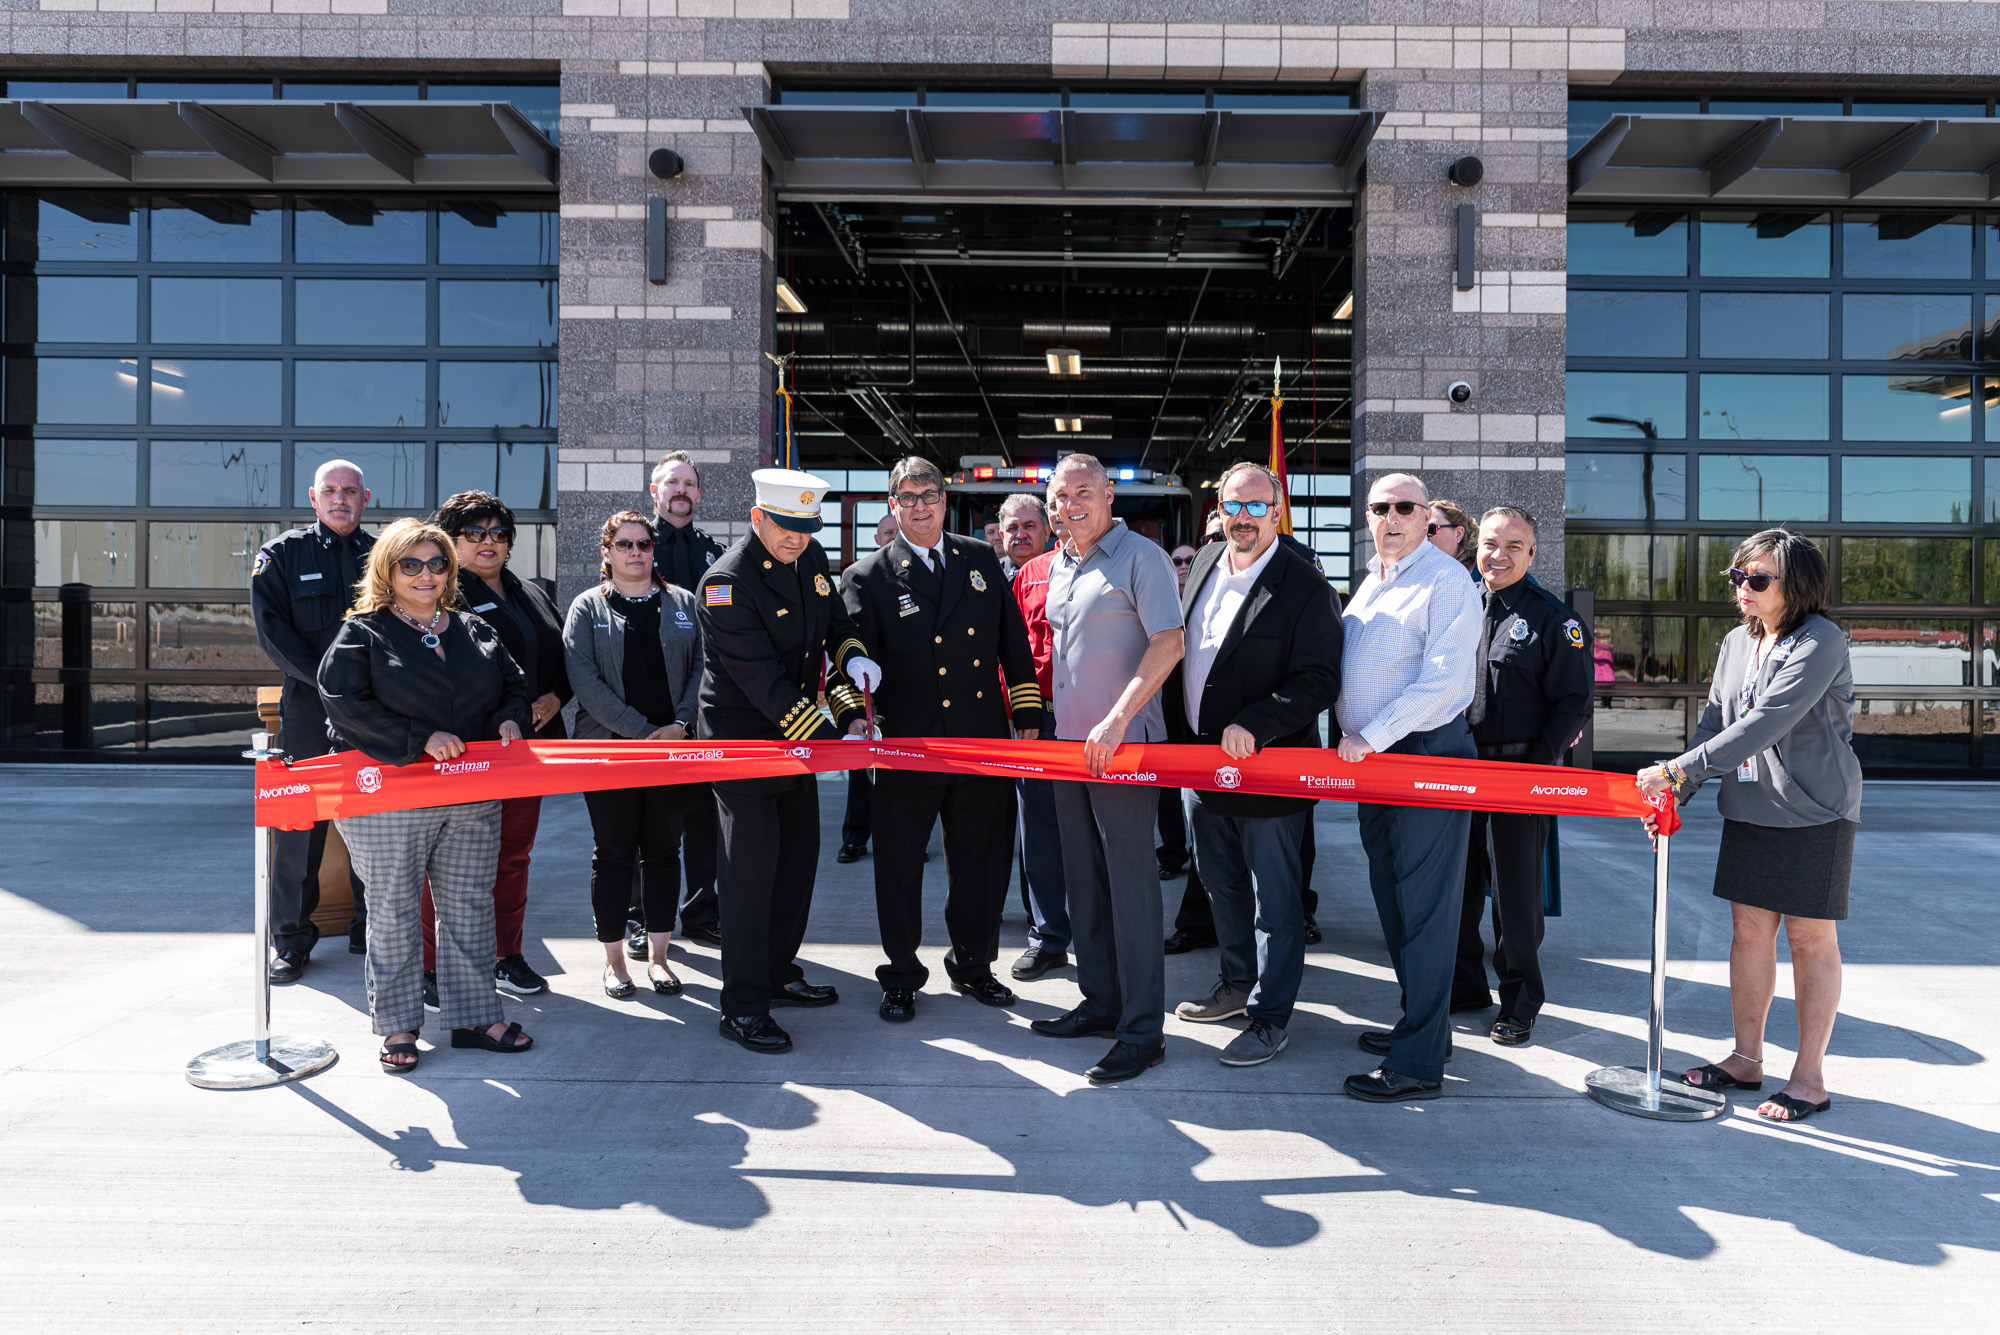 Willmeng celebrates opening of Avondale Fire Station 175 with a group of people standing in front of the building and a ribbon.